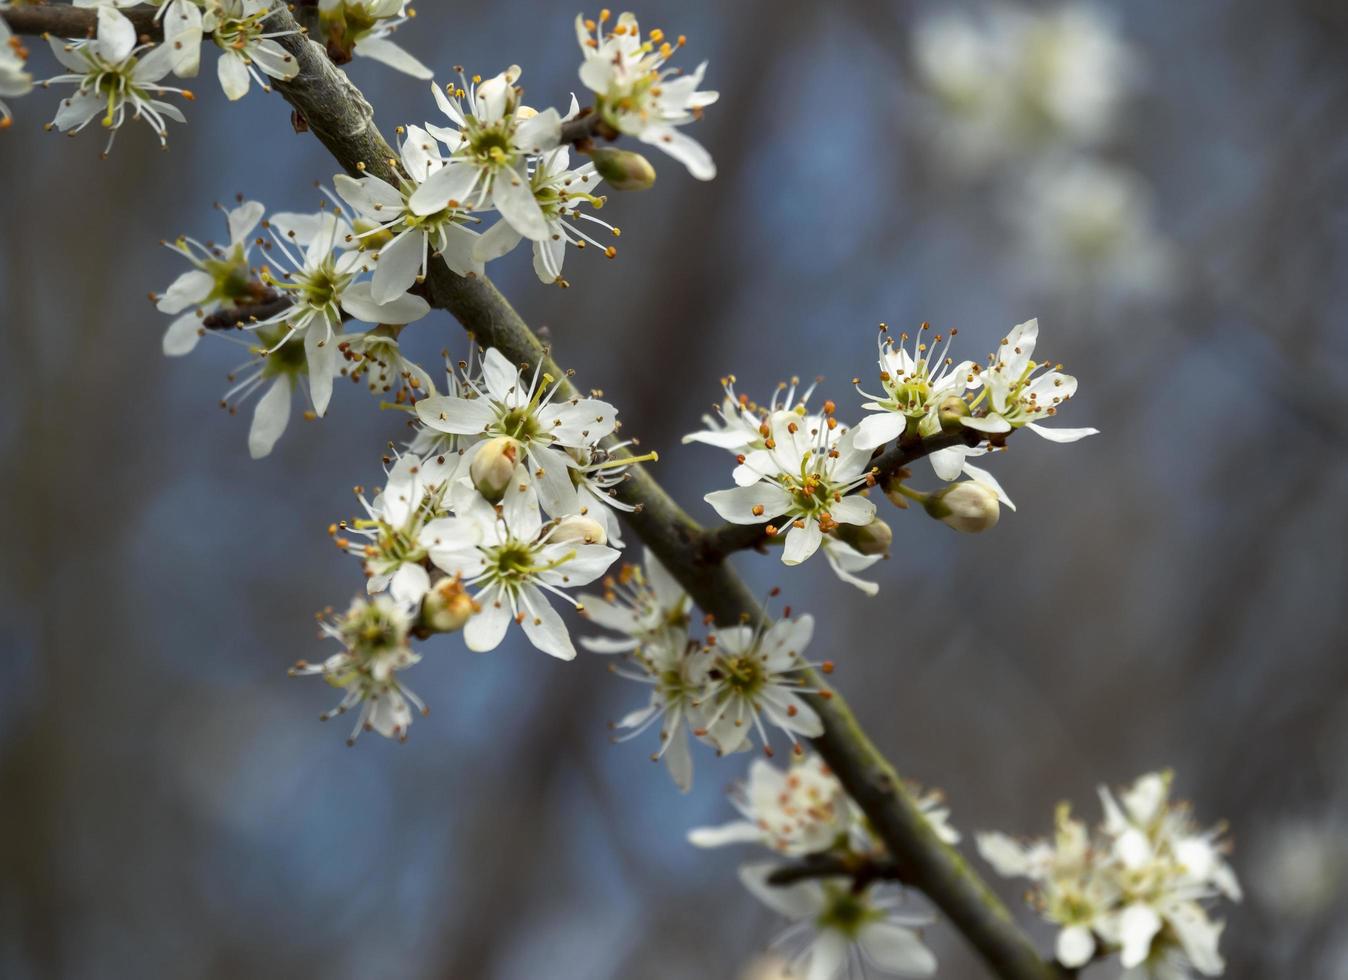 Blackthorn blossom Prunus spinosa on a tree branch photo